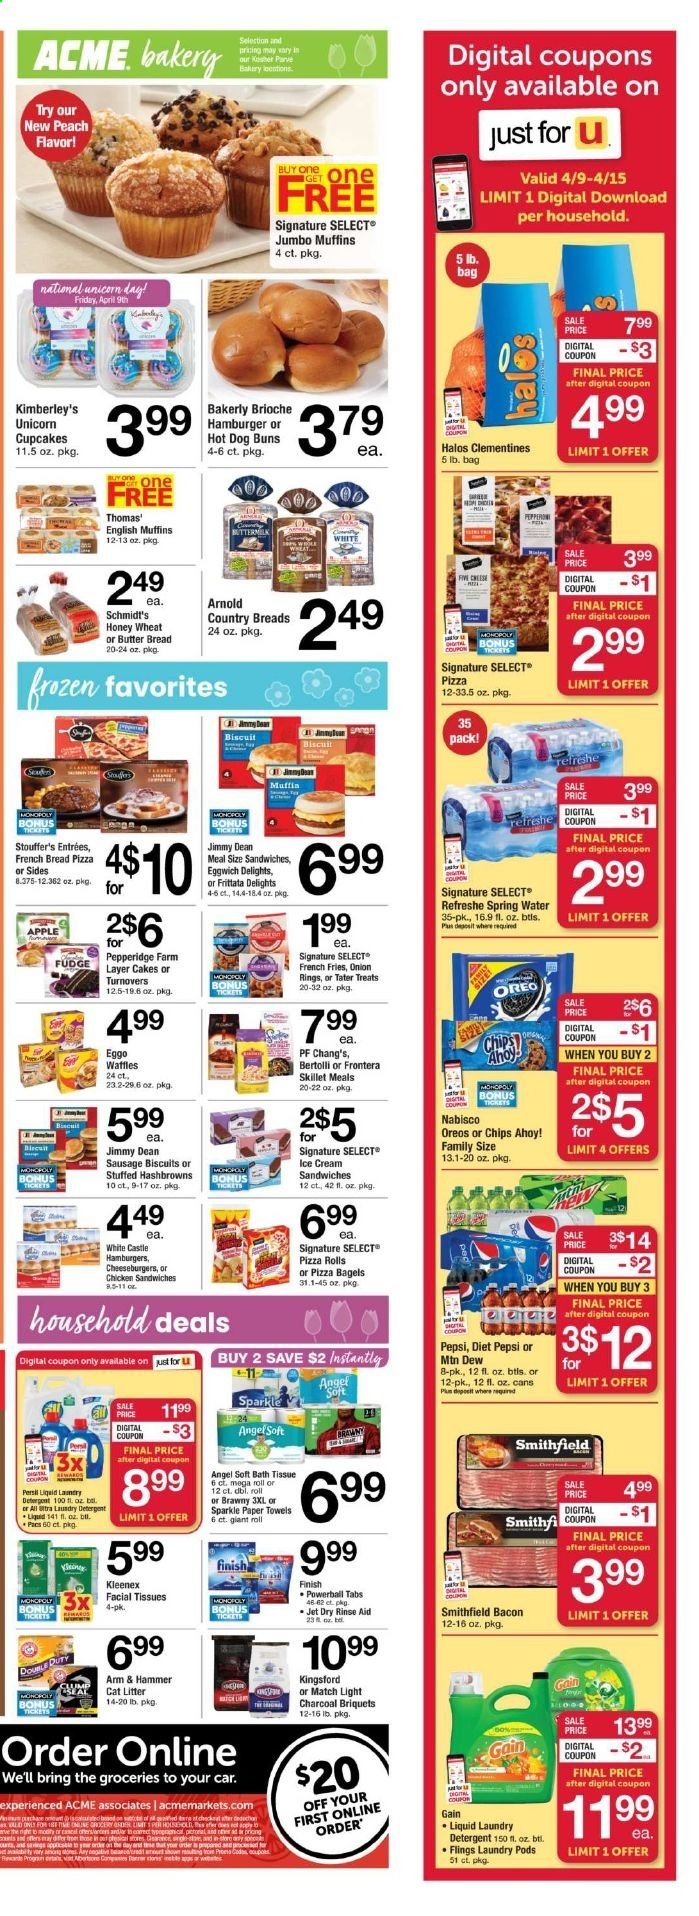 thumbnail - ACME Flyer - 04/09/2021 - 04/15/2021 - Sales products - bagels, bread, english muffins, cake, pizza rolls, buns, brioche, turnovers, cupcake, hash browns, pizza, onion rings, Bertolli, Jimmy Dean, bacon, sausage, Oreo, ice cream, ice cream sandwich, Stouffer's, potato fries, french fries, fudge, biscuit, Chips Ahoy!, ARM & HAMMER, Mountain Dew, Pepsi, Diet Pepsi, spring water, Castle, bath tissue, Kleenex, kitchen towels, paper towels, detergent, Gain, laundry detergent, Jet, facial tissues, cat litter, clementines. Page 3.